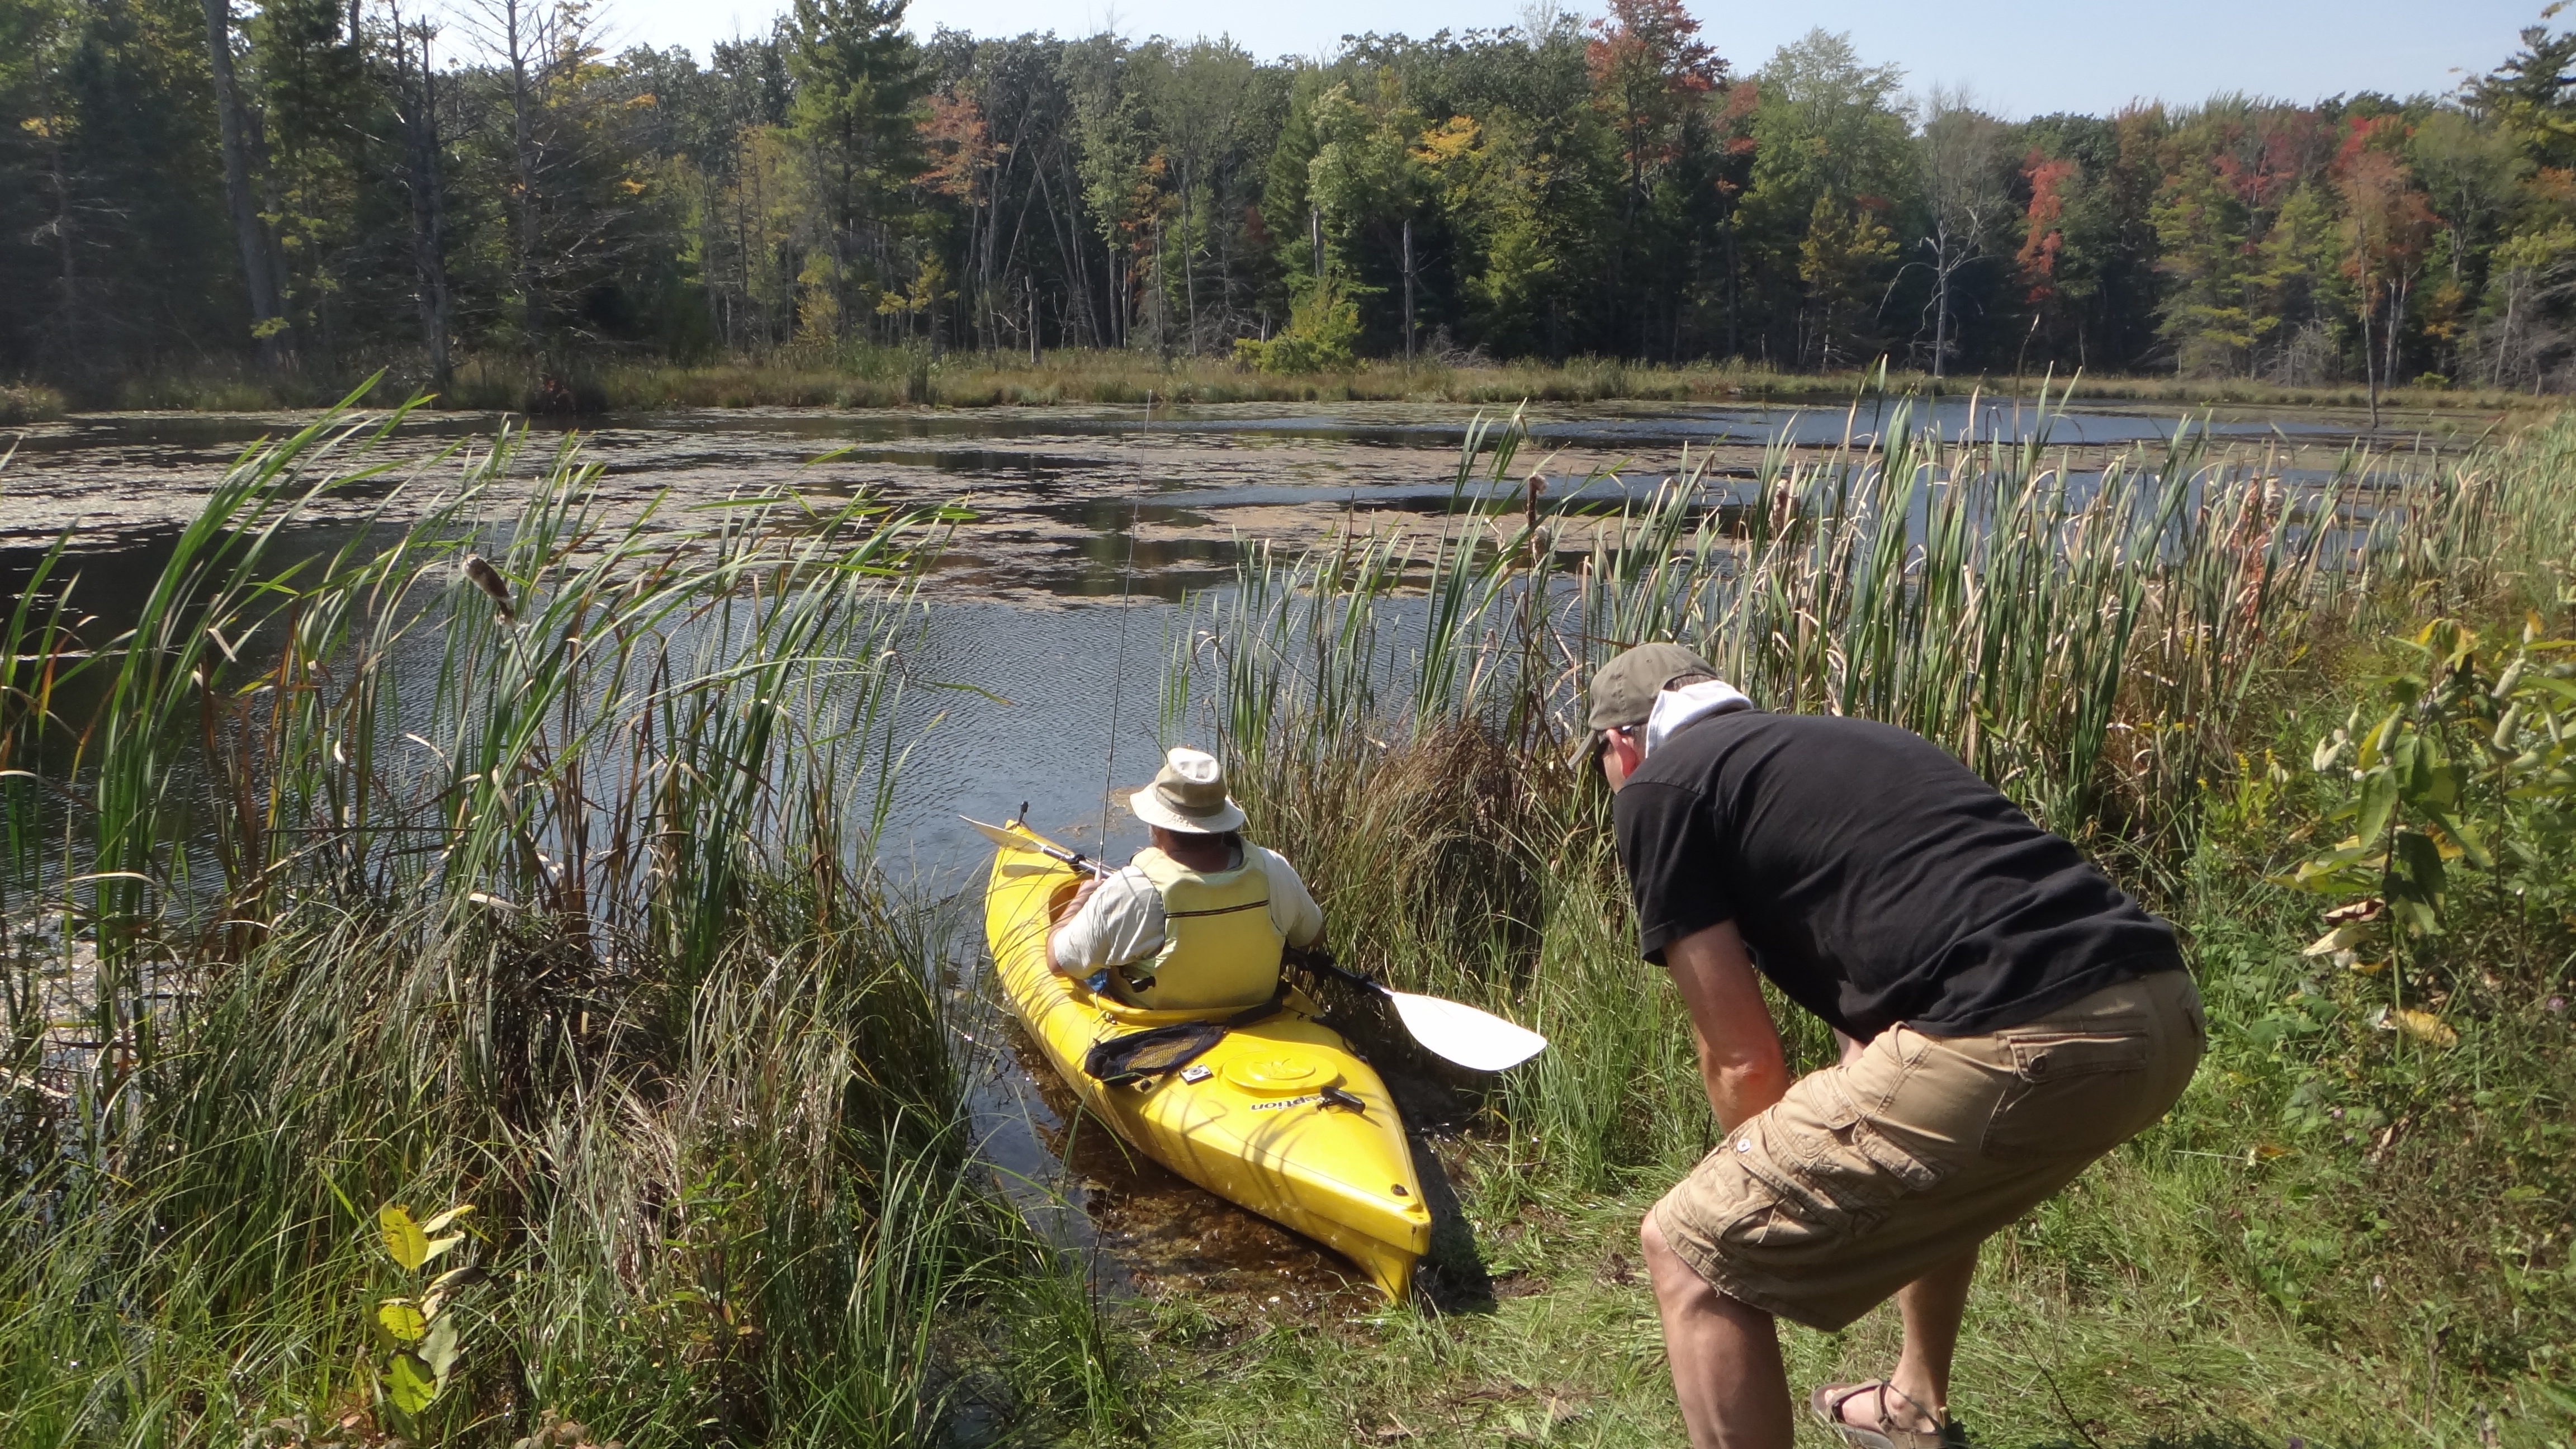 Launching into destination number two, the bass pond at Clark's Marsh